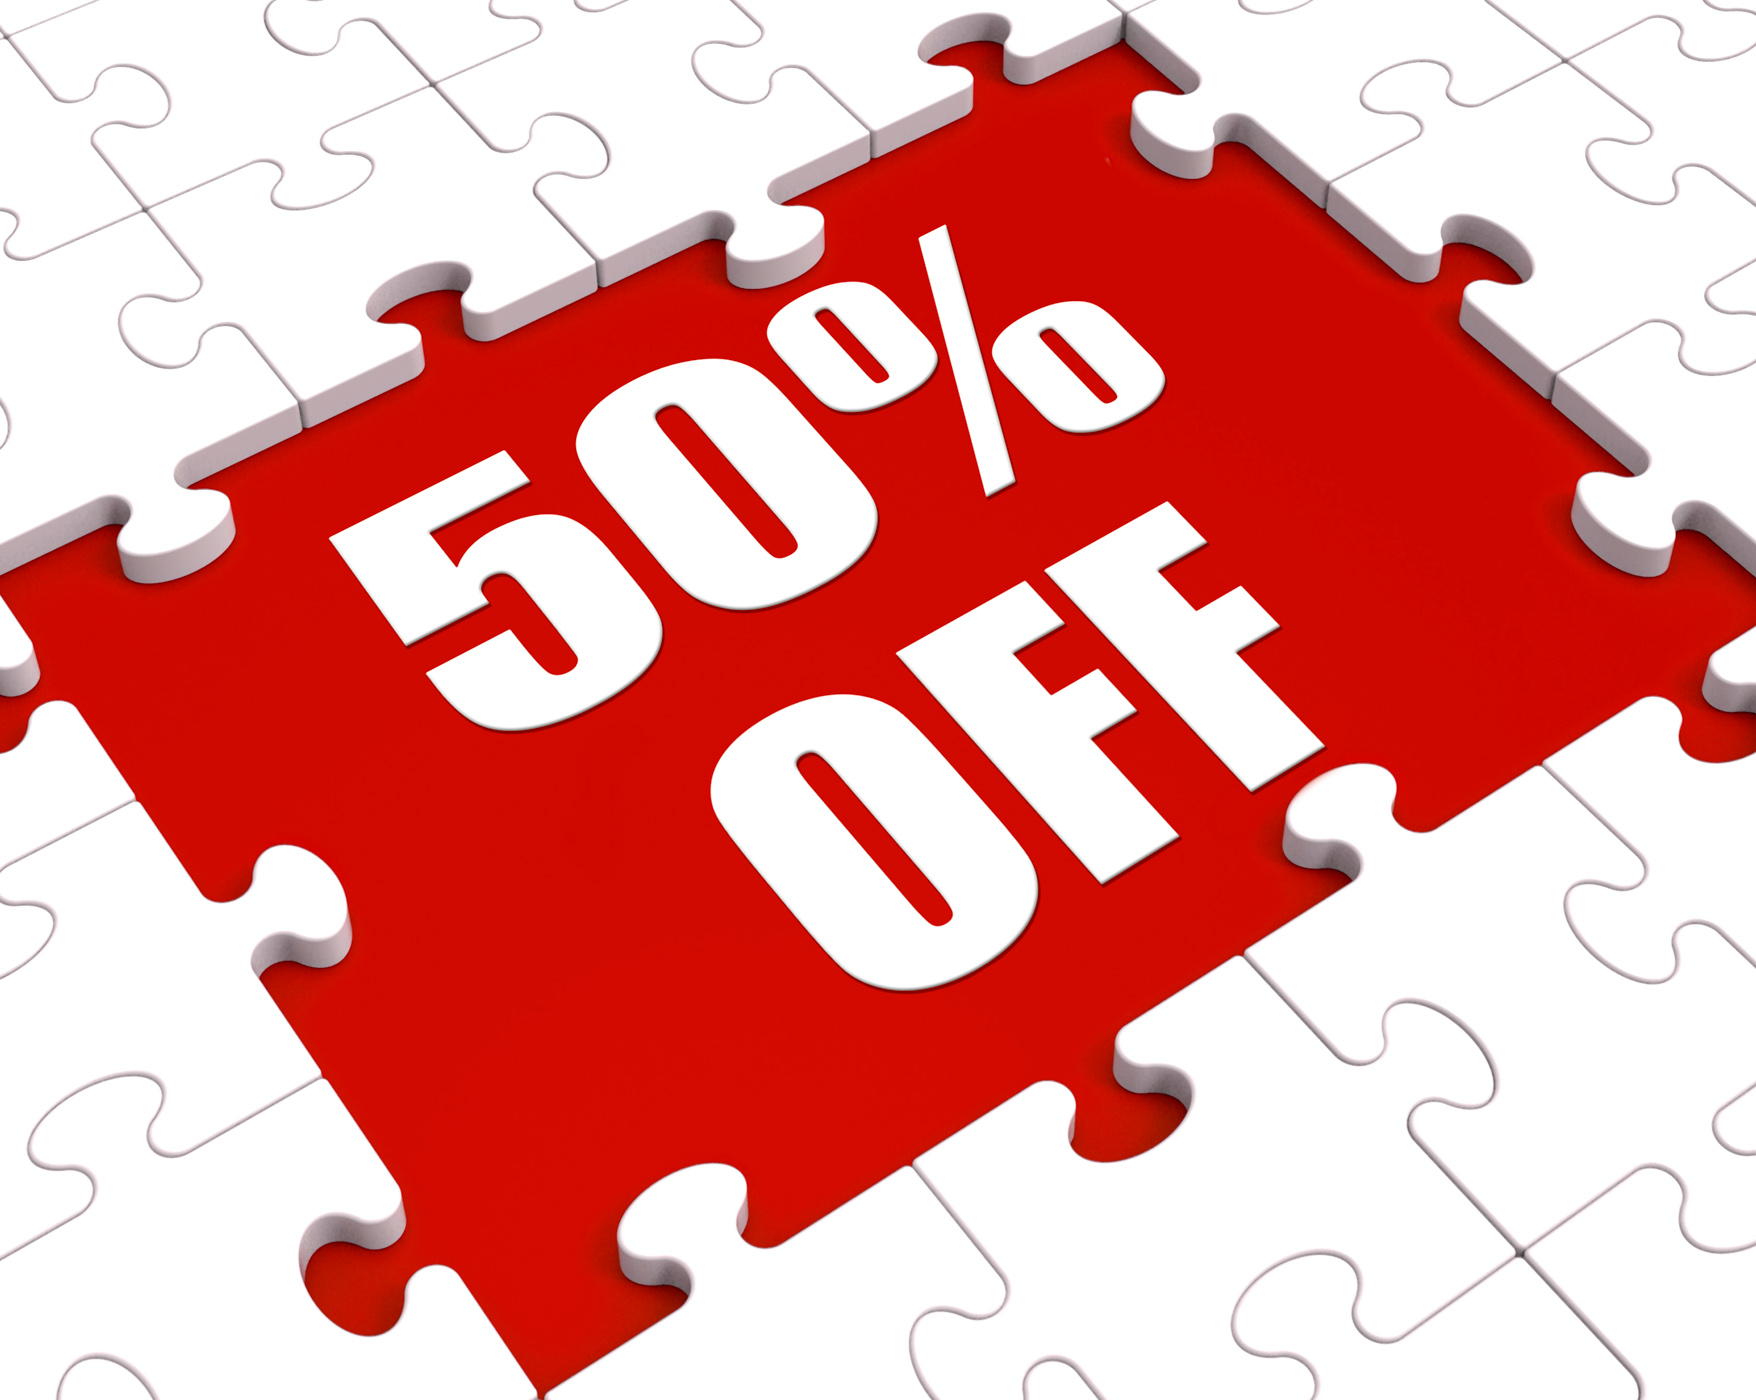 Fifty percent off puzzle means reduced discount or sale 50 photo